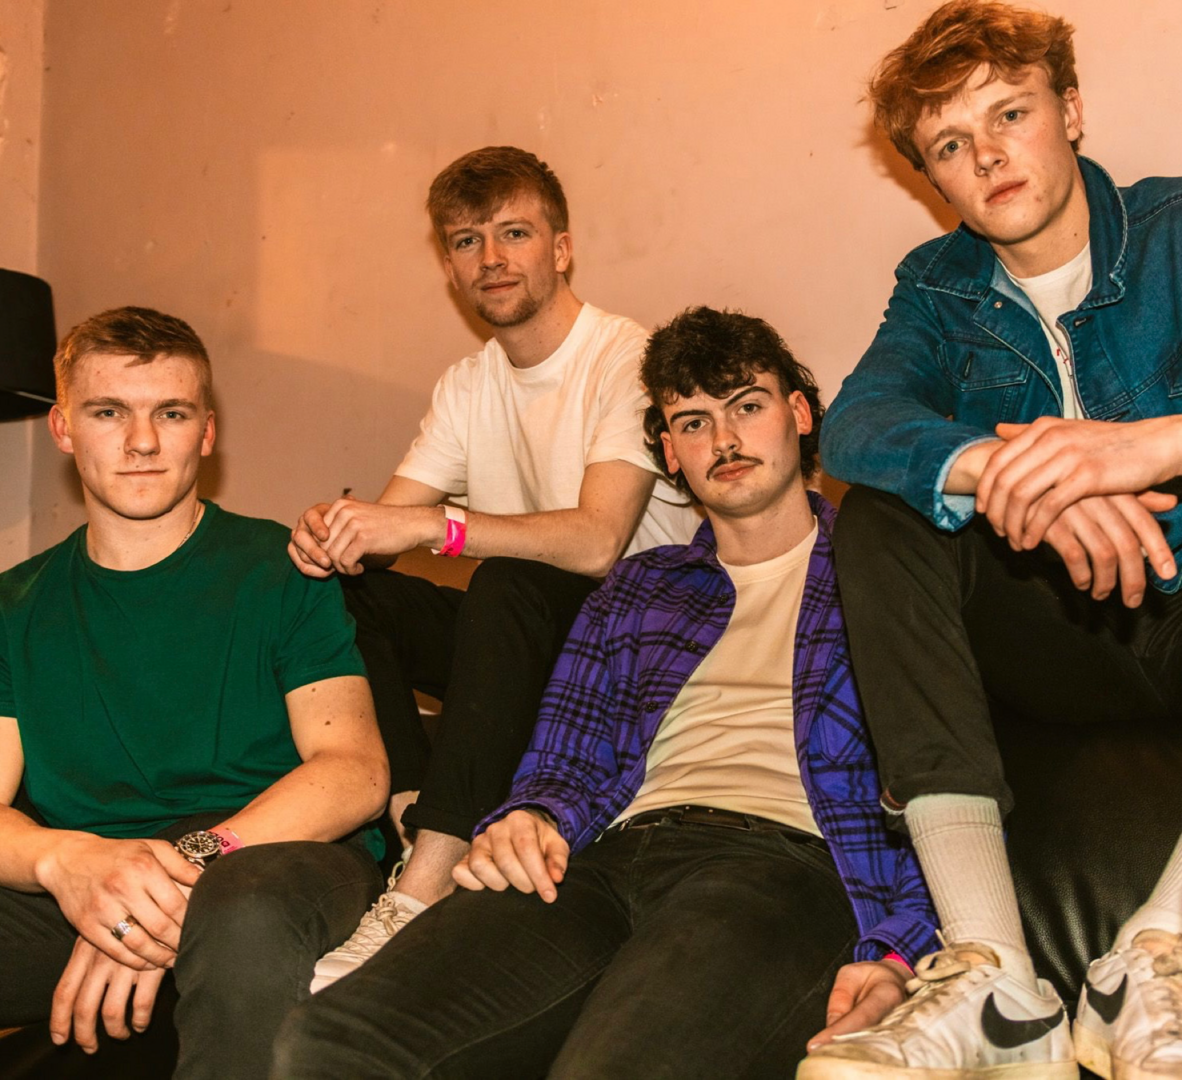 Galway Indie Band The Rosecaps Talk About Their Metamorphosis from a School Band to a Nationwide Headlining Band